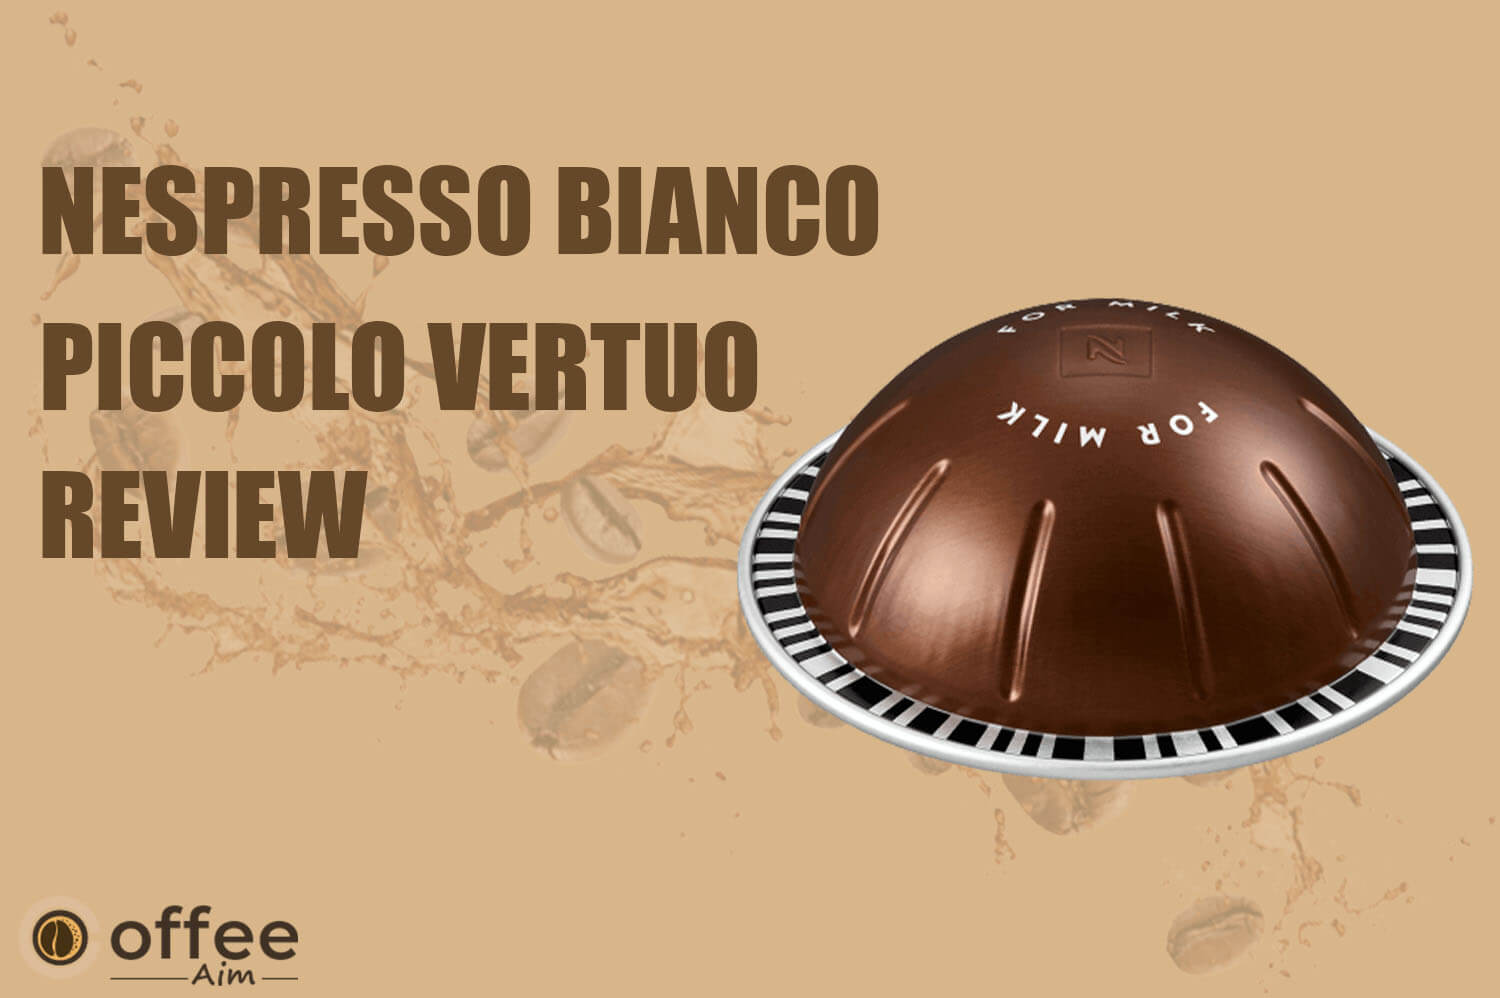 Featured image for the article "Nespresso Bianco Piccolo Vertuo Review"